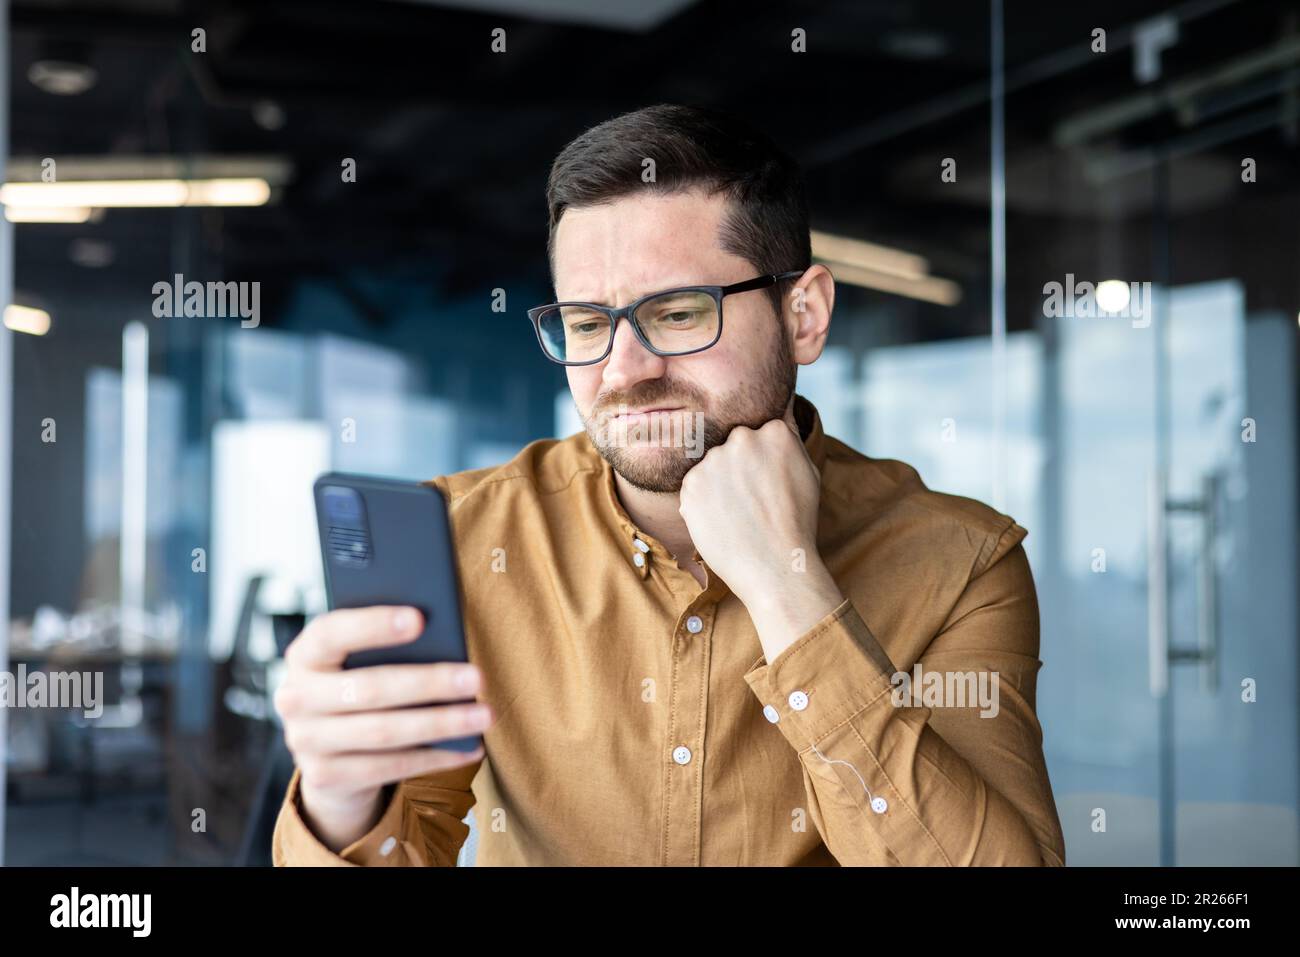 Tired businessman, employee sitting at a desk in an office center and using the phone. Bored and grimacing, he looks at the screen, checks his mail, p Stock Photo